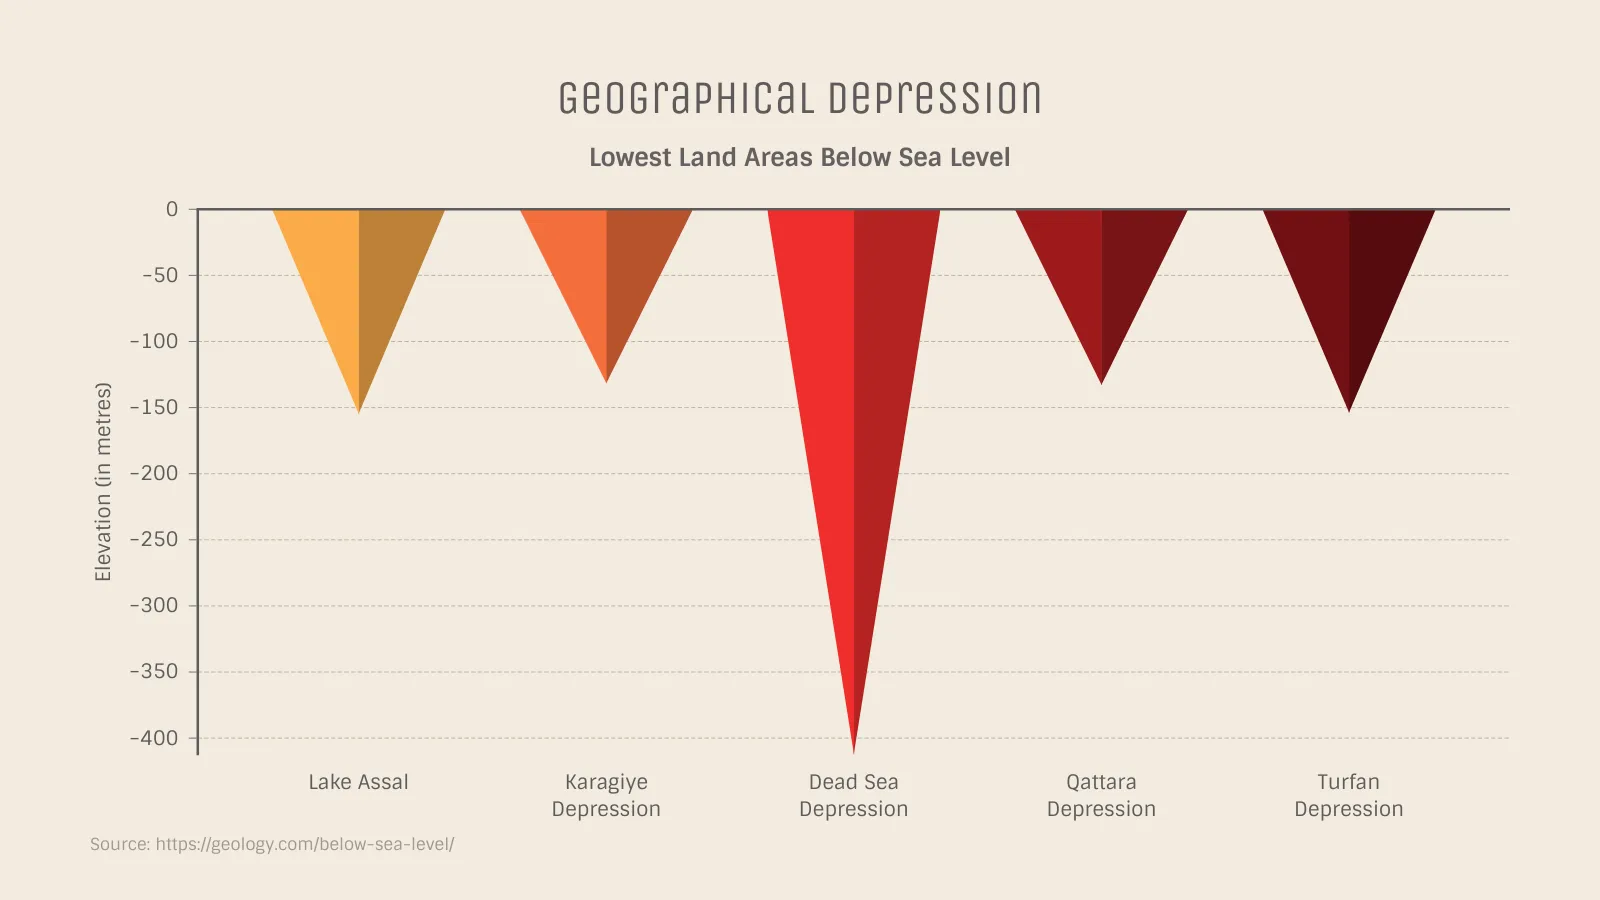 Triangle Bar Chart example: Geographical depression